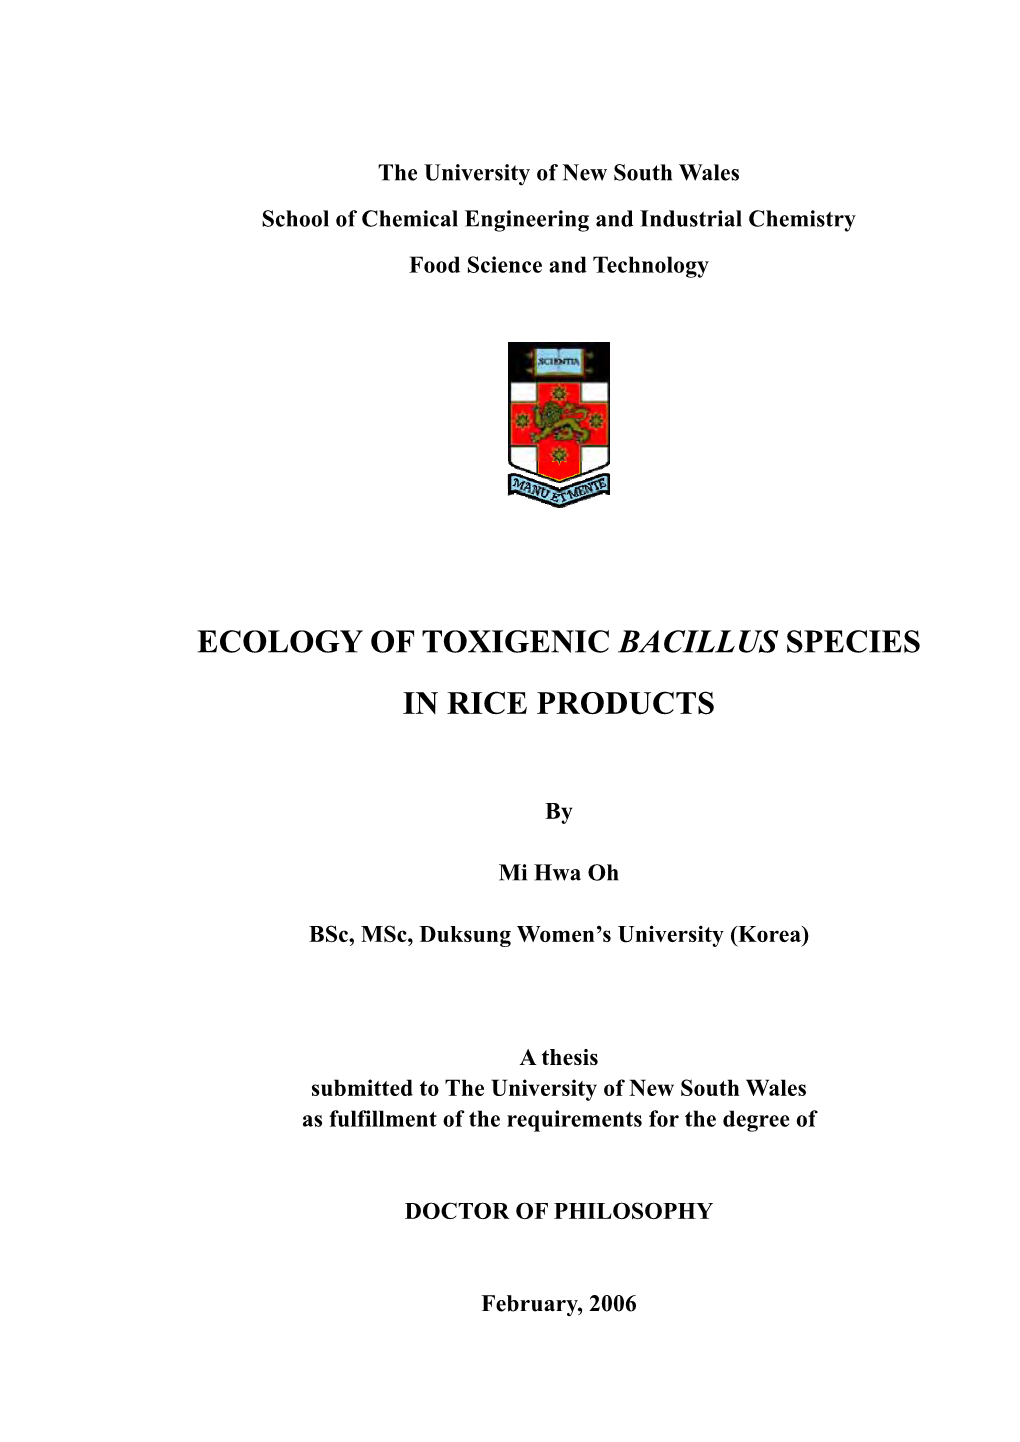 Ecology of Toxigenic Bacillus Species in Rice Products